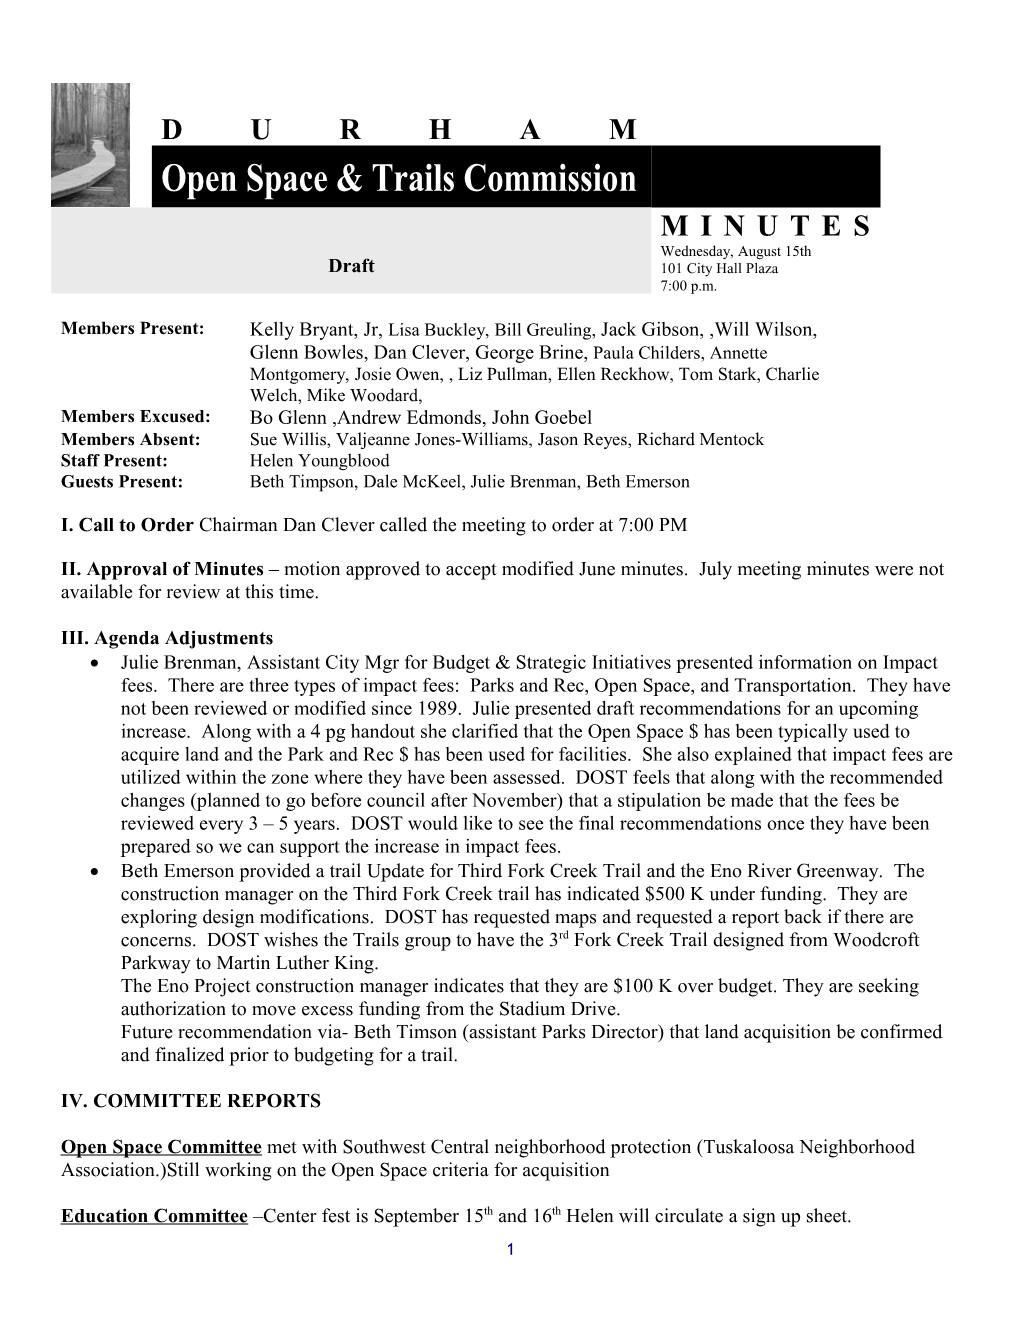 Open Space & Trails Commission